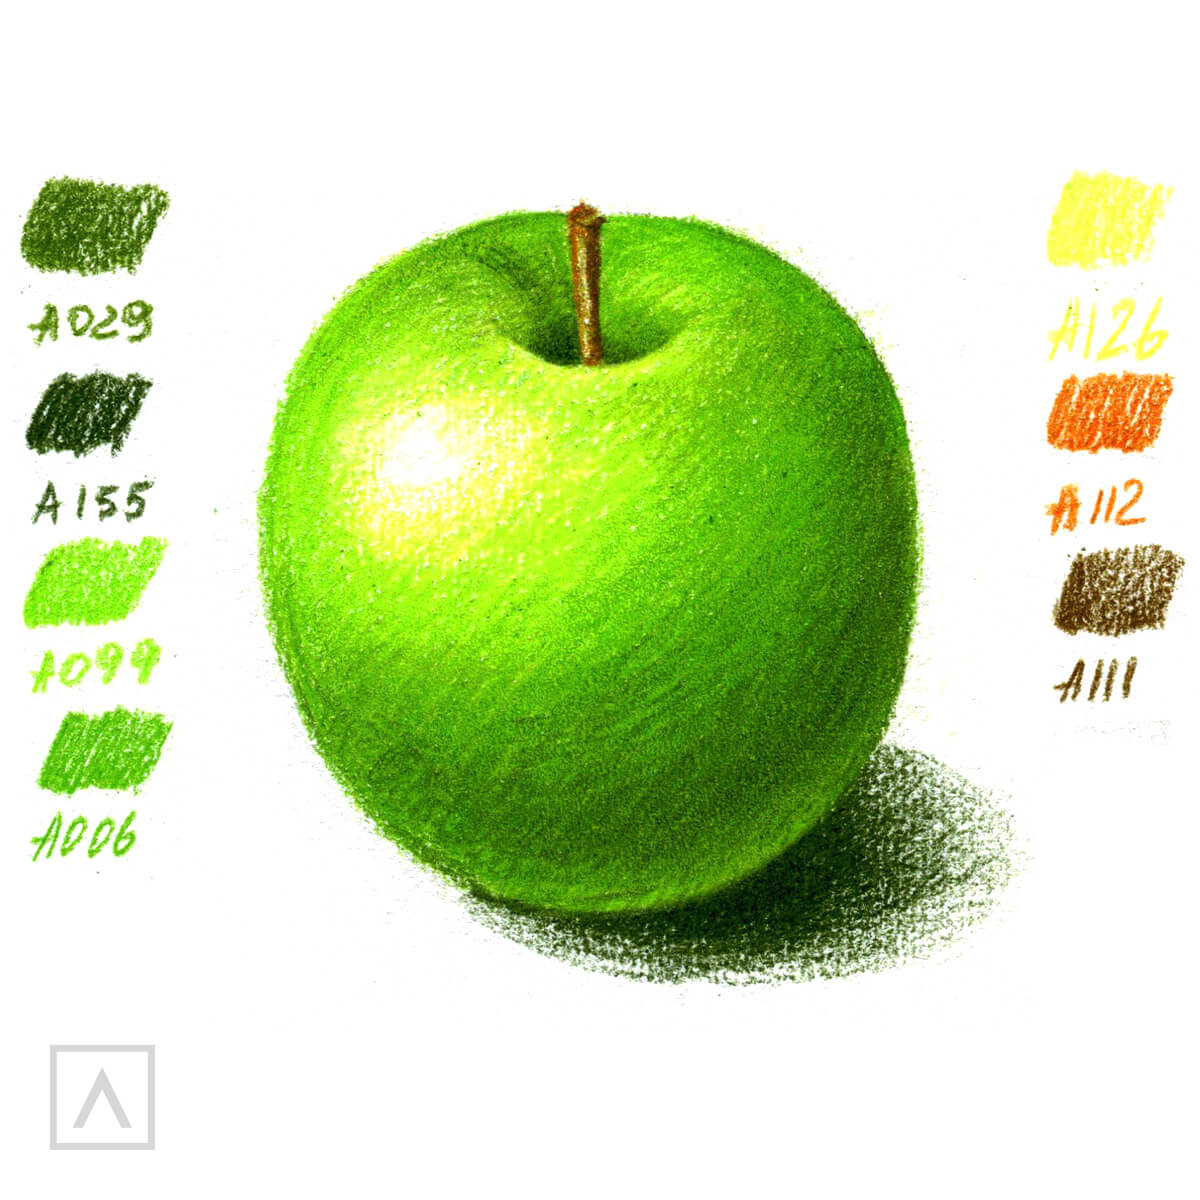 How To Color Realistically With Colored Pencils Arteza Using a minimum of colours and in just 8 steps you'll create a drawing of a realistic apple. how to color realistically with colored